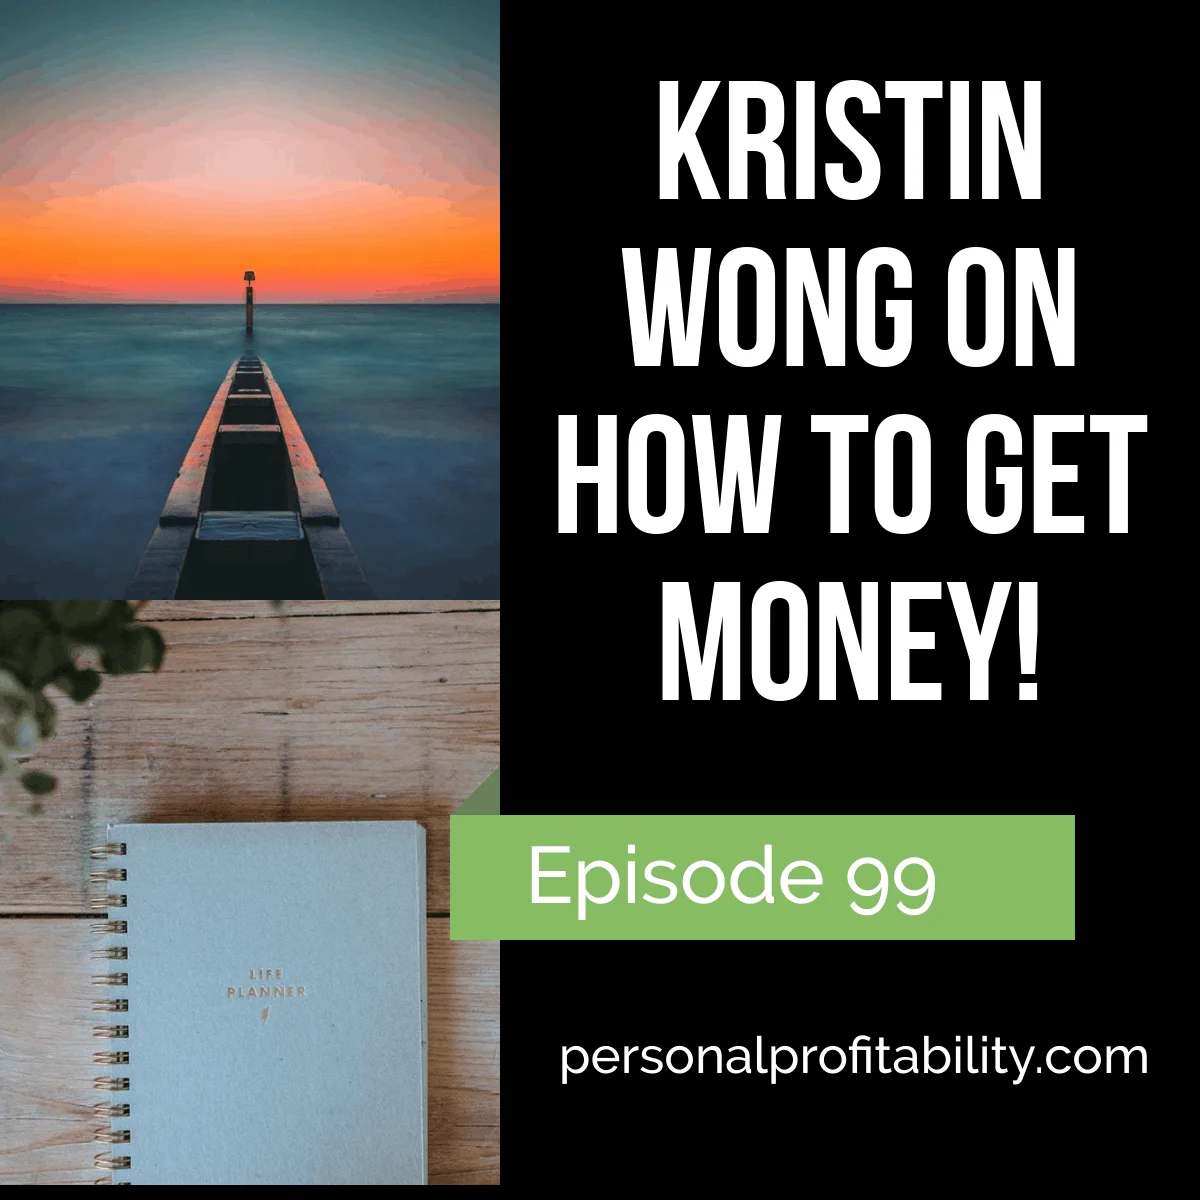 Have you ever read an article by Kristin Wong? You probably have, you just don't know it! Kristin is a popular personal finance writer and has written for Lifehacker and the New York Times. In this episode, we'll chat about her new book, personal finance, and more.